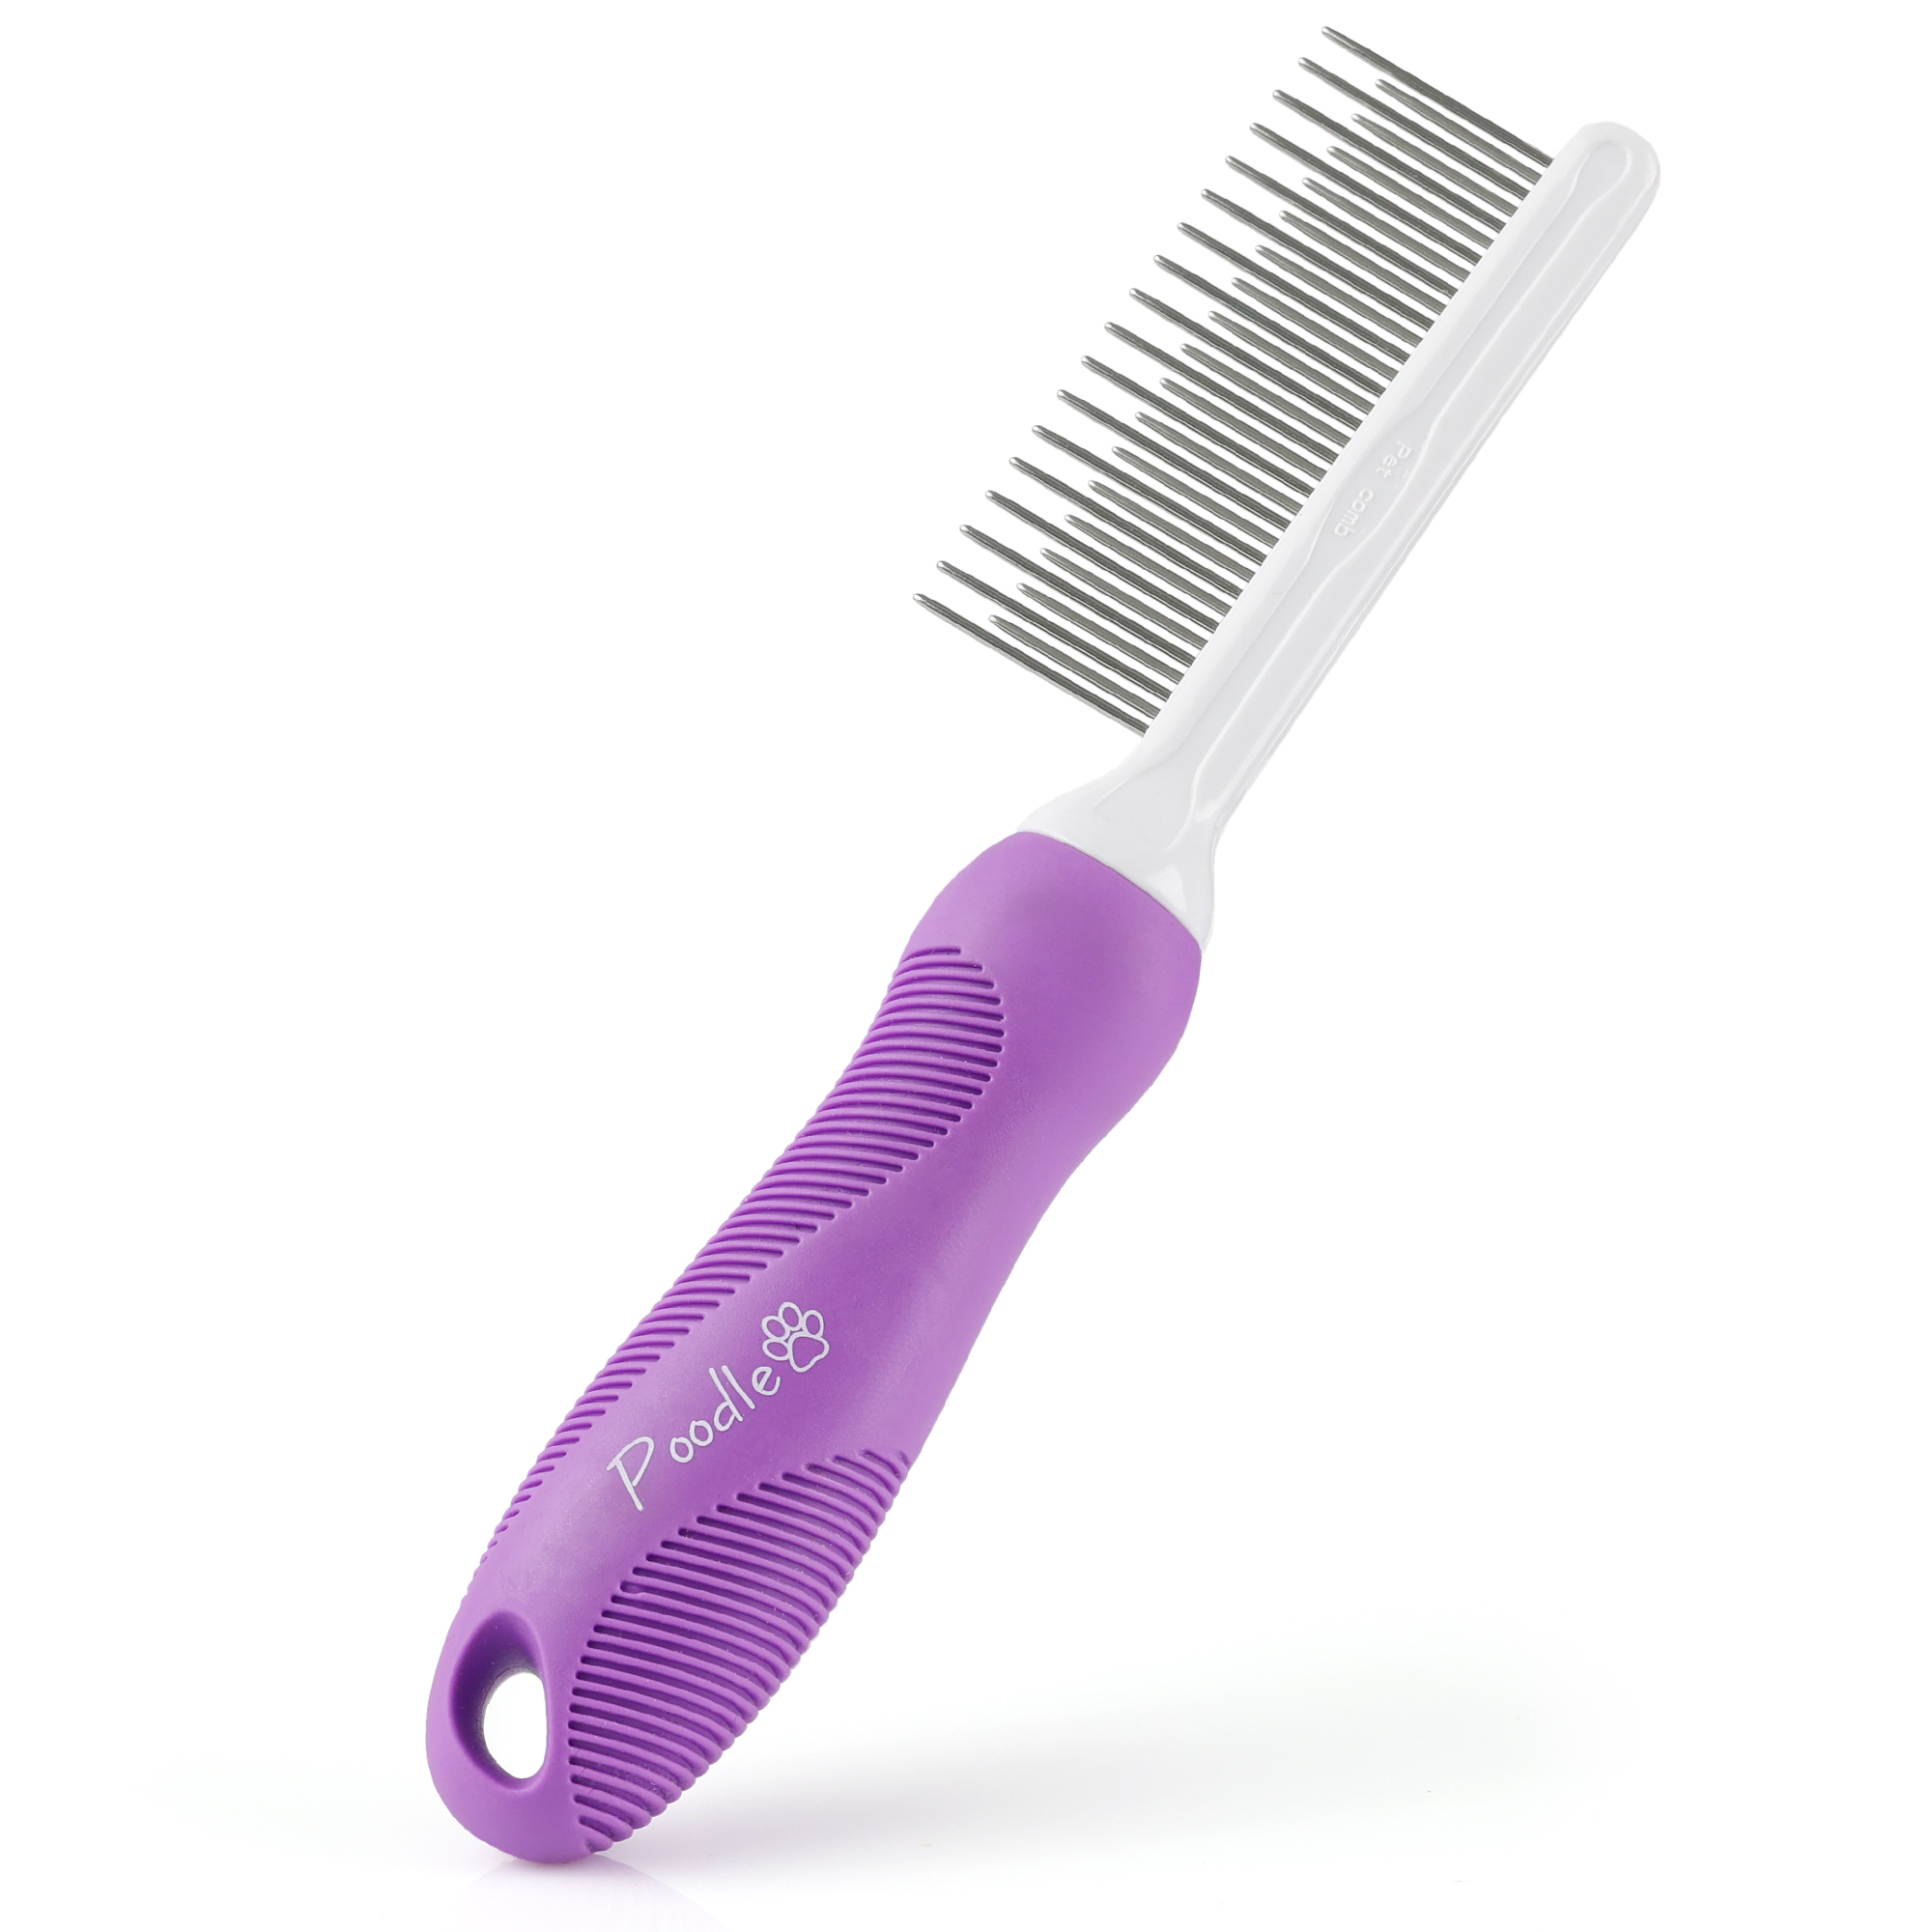 Poodle Pet 2-in-1 Stainless Steel Detangler Comb Cat & Dog Grooming Brush - image 1 of 9